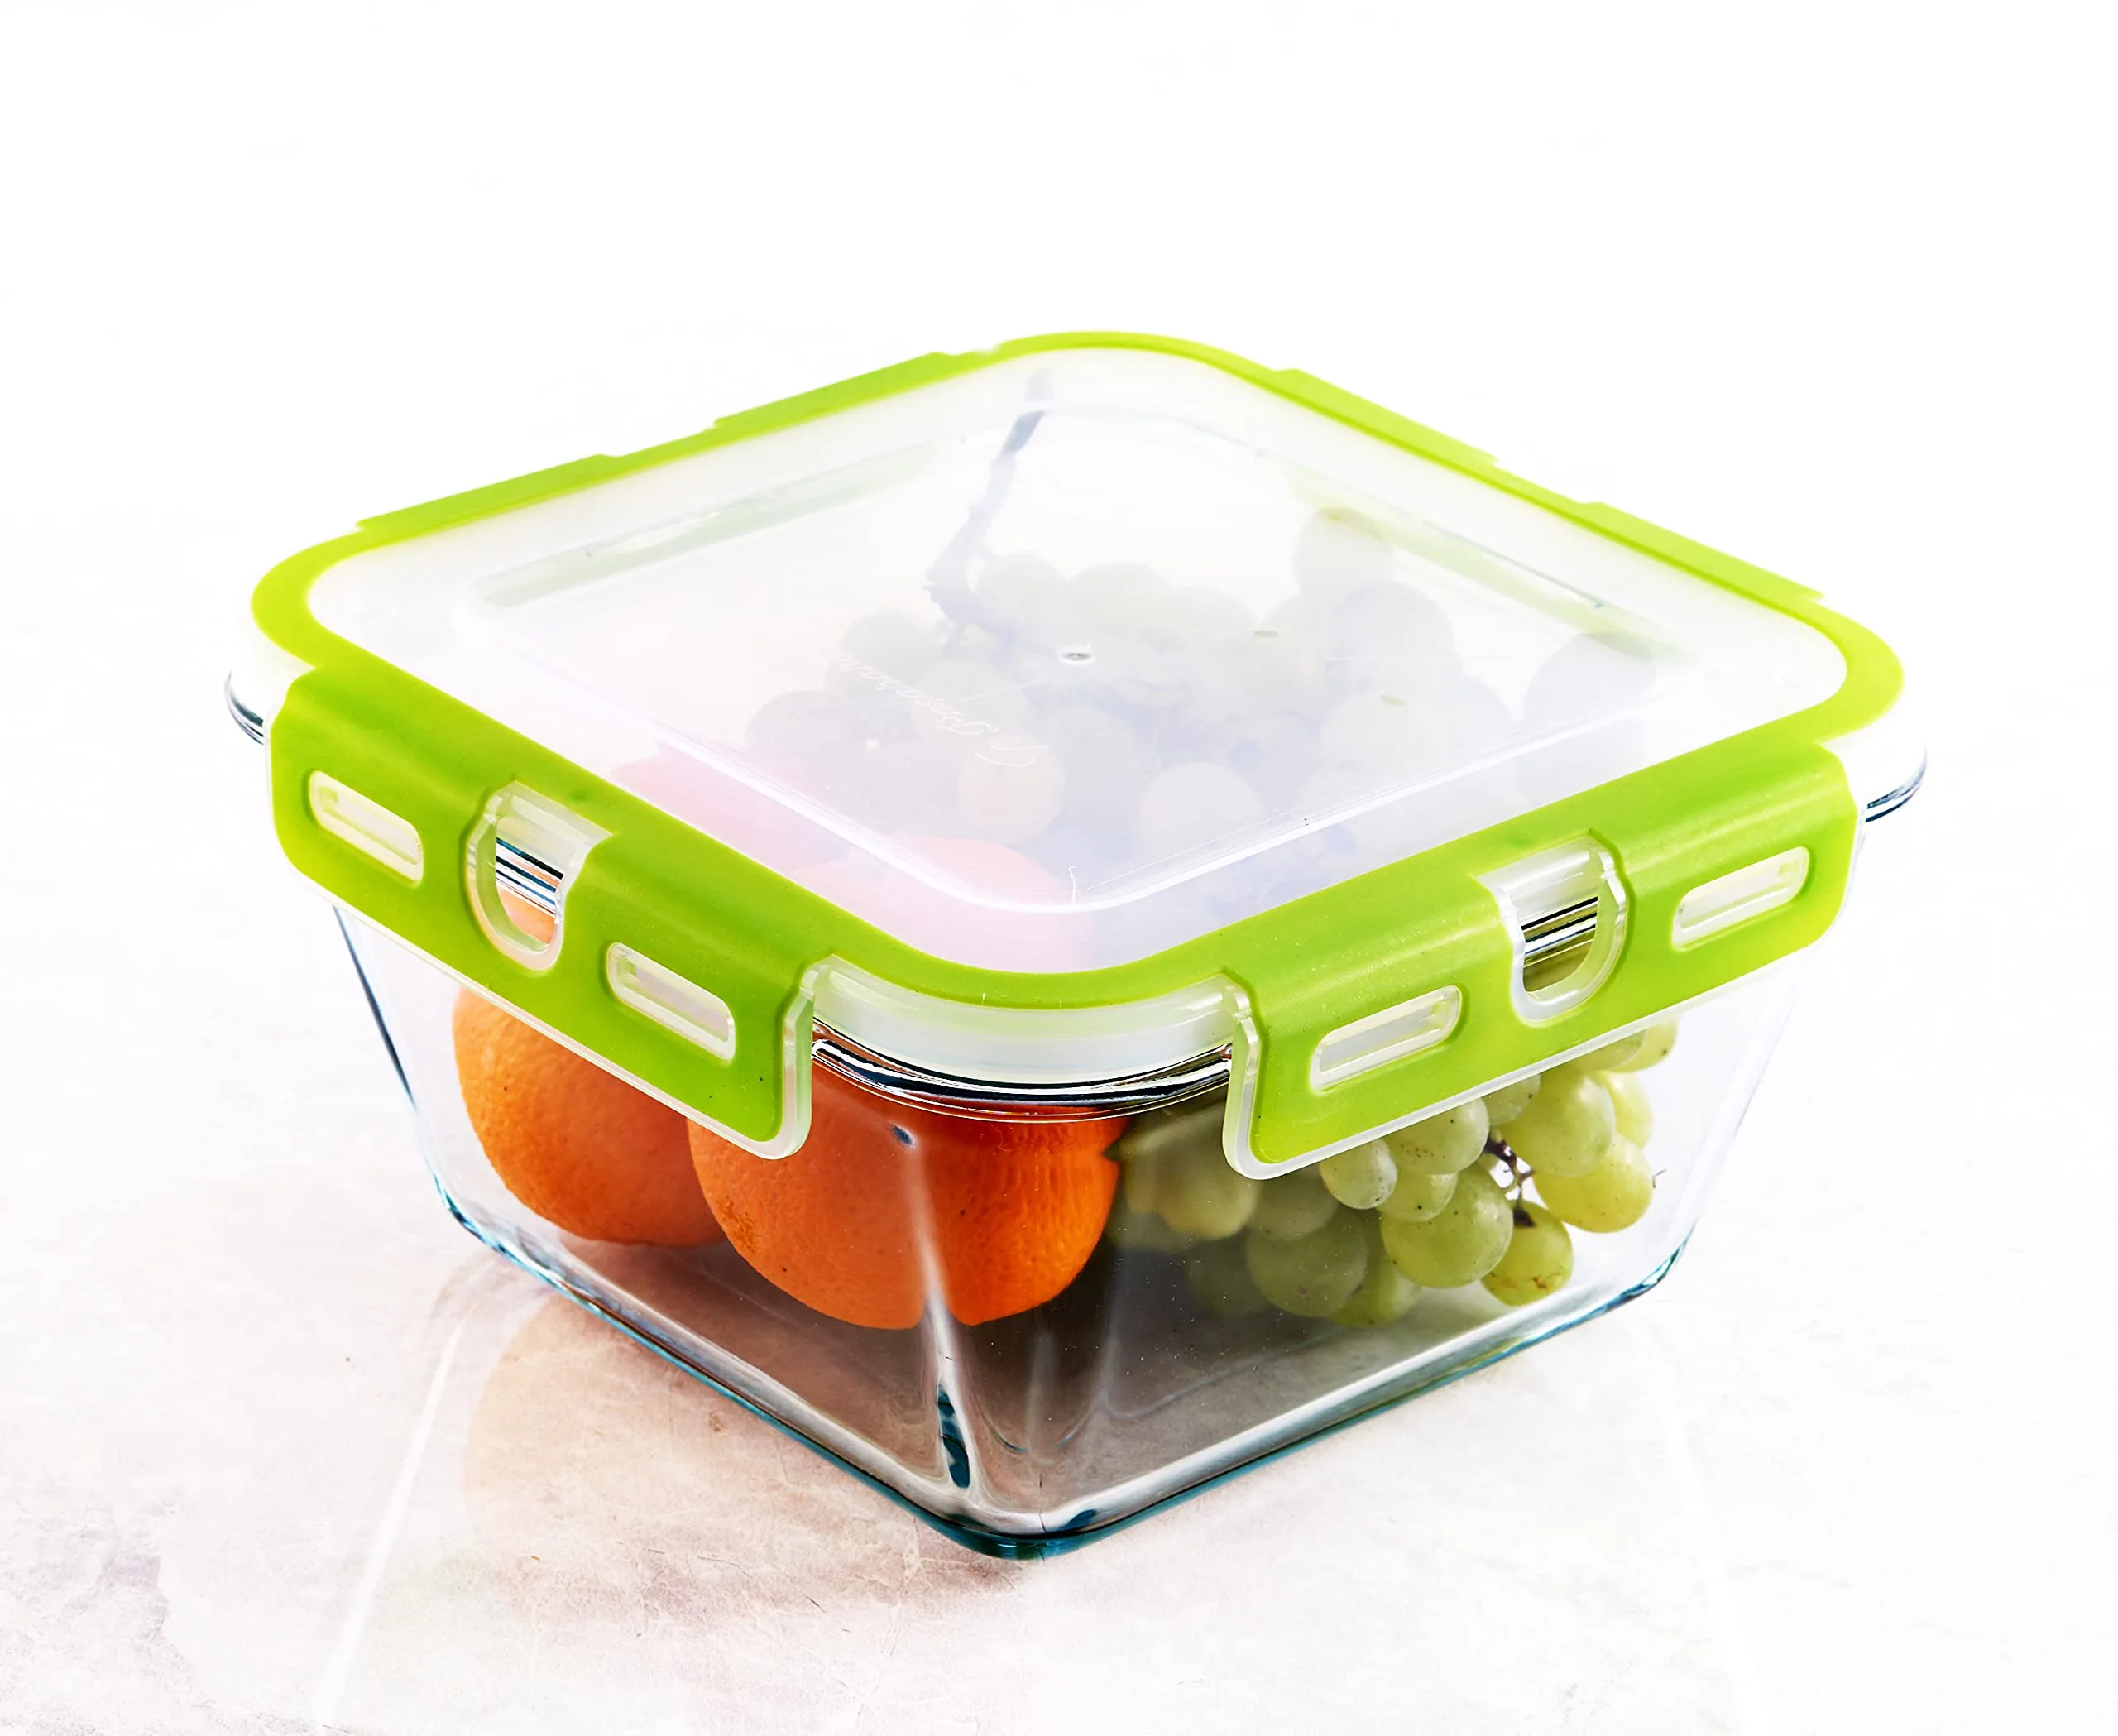 Biandeco Glass Food Storage Container 2 Compartments with Lid